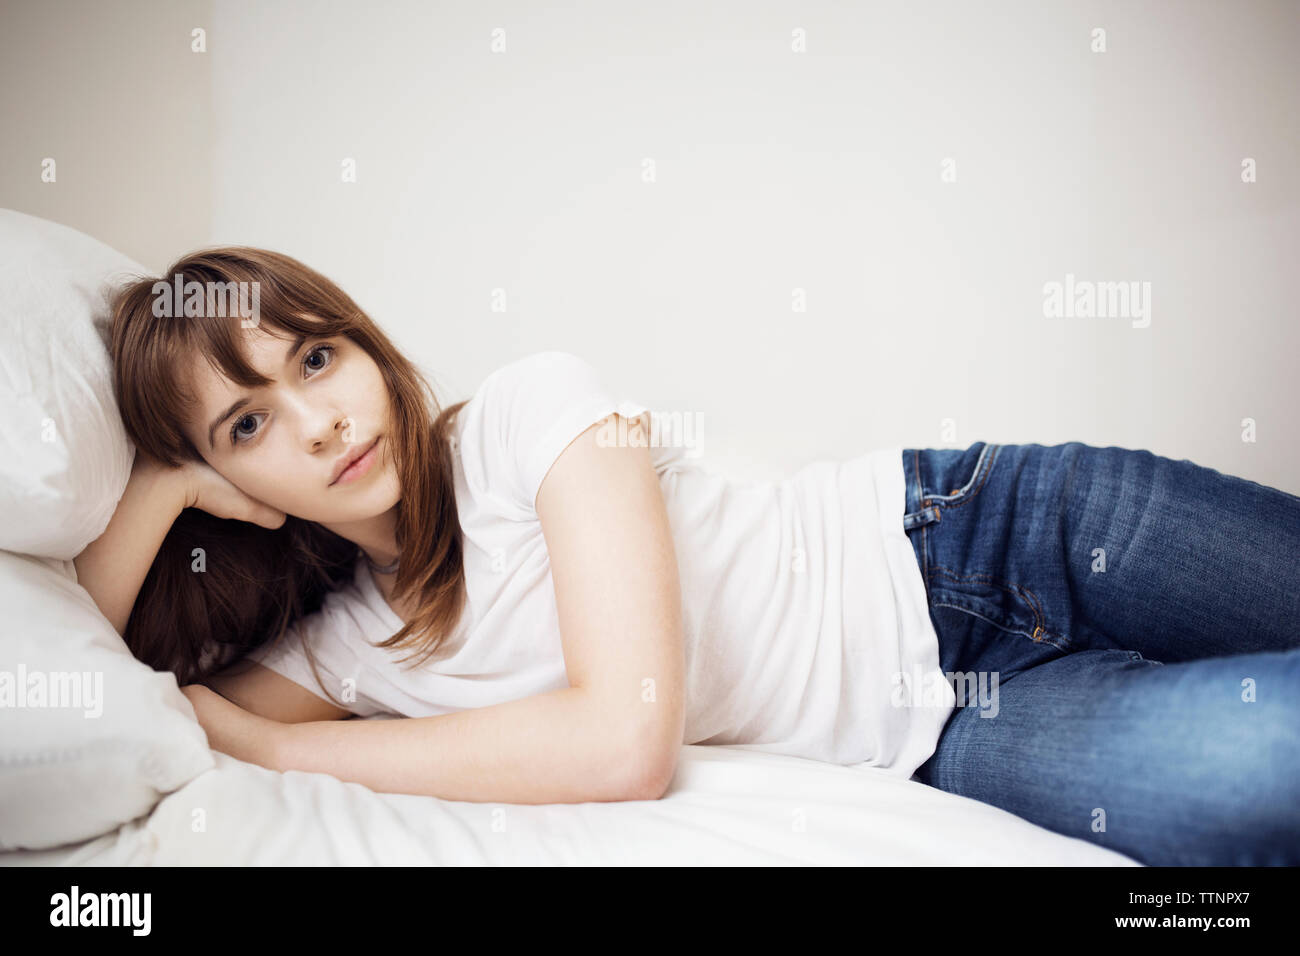 Portrait of young woman lying on bed at home Banque D'Images